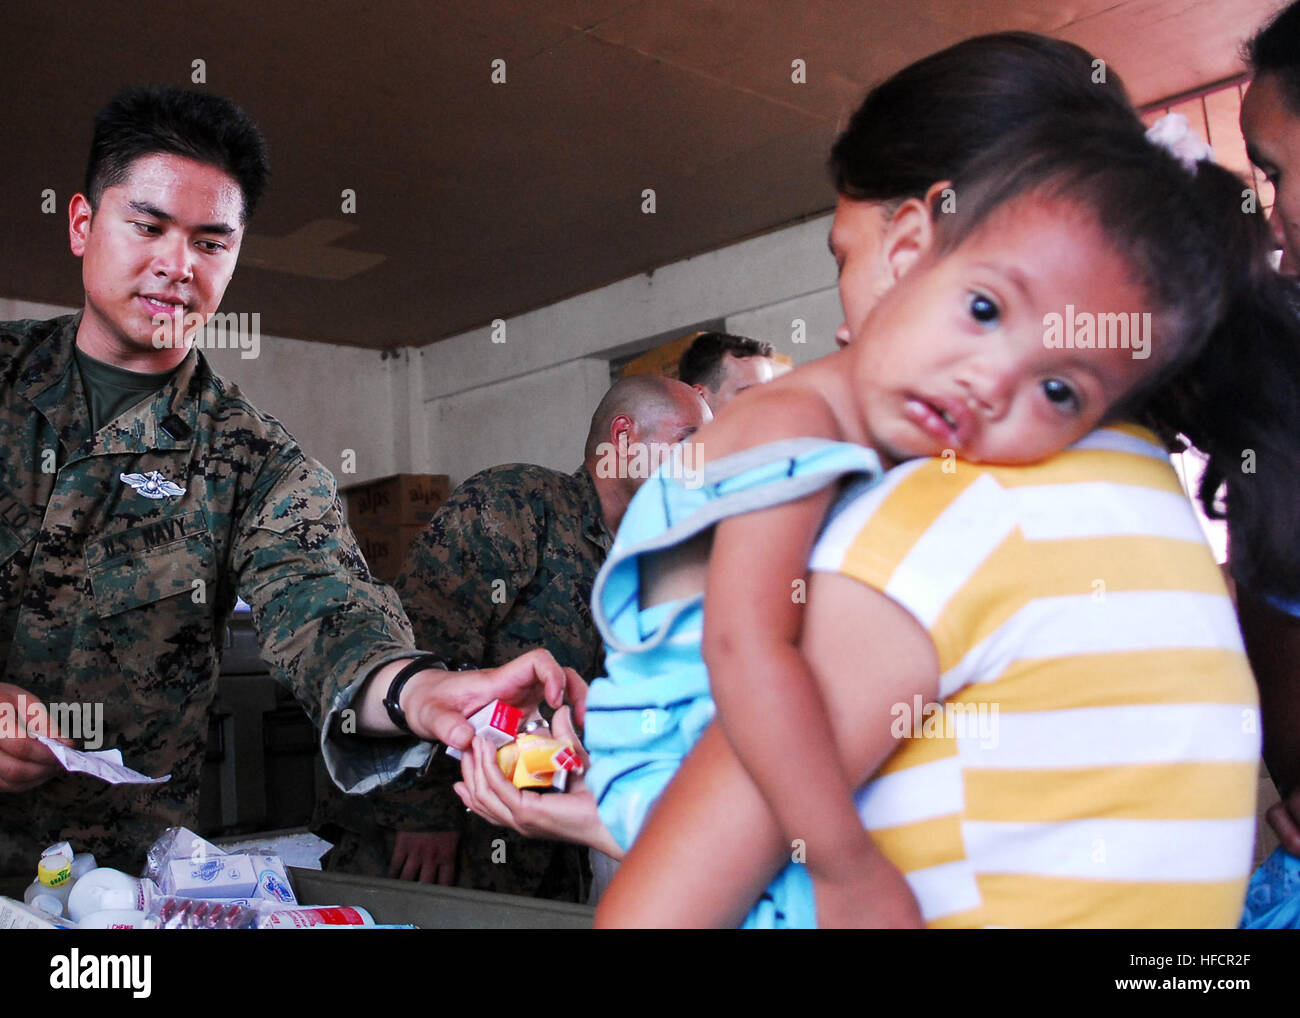 Petty Officer 2nd Class Joseph Castillo, from the Combat Logistics Battalion Health Service Support Team of the 31st Marine Expeditionary Unit, dispenses medication during a medical civil action project at San Juan Elementary School in Ternate, Philippines. The 31st MEU is operating with the forward-deployed Essex Amphibious Ready Group as part of Balikatan 2010, an annual, bilateral exercise designed to improve interoperability between the U.S. and Republic of the Philippines. Philippines activity 258800 Stock Photo